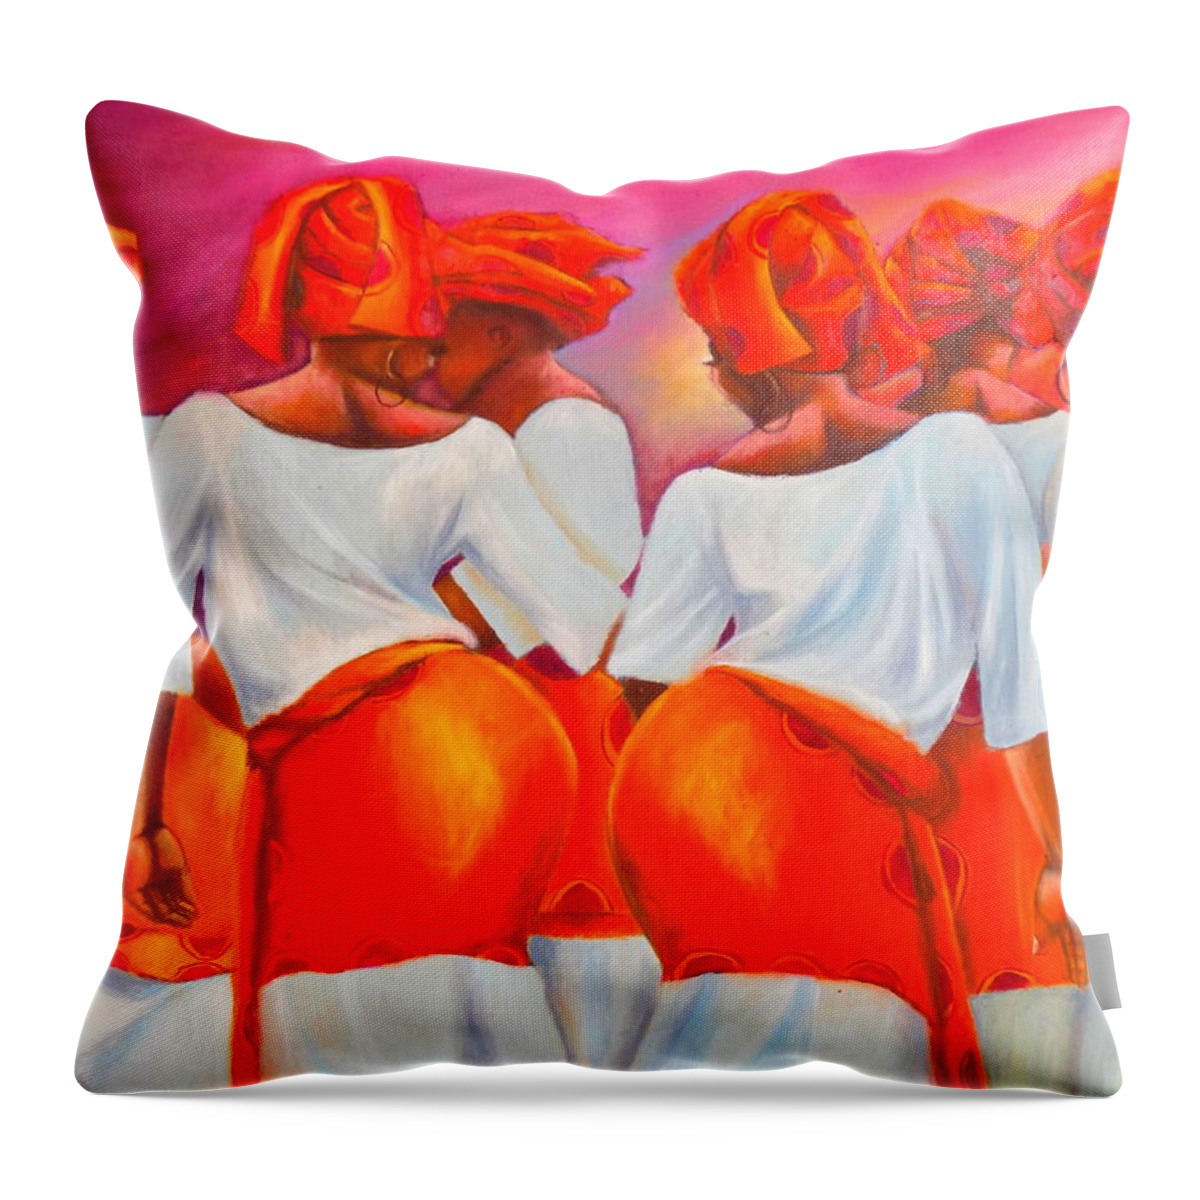 Orange Throw Pillow featuring the painting Yoruba Traditional Dancers by Olaoluwa Smith